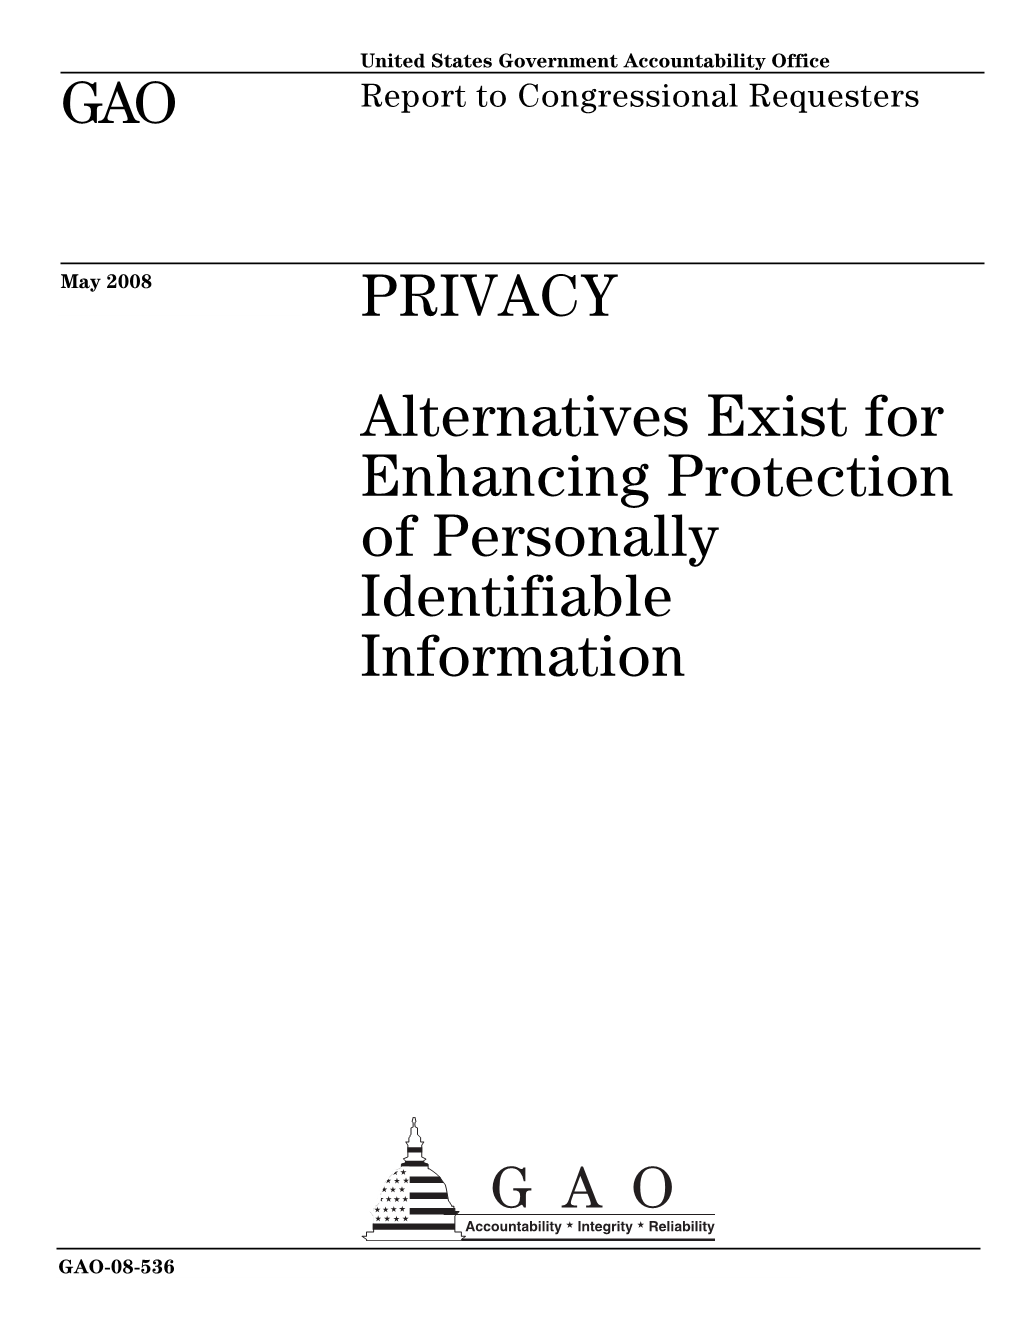 GAO-08-536 Privacy: Alternatives Exist for Enhancing Protection of Personally Identifiable Information